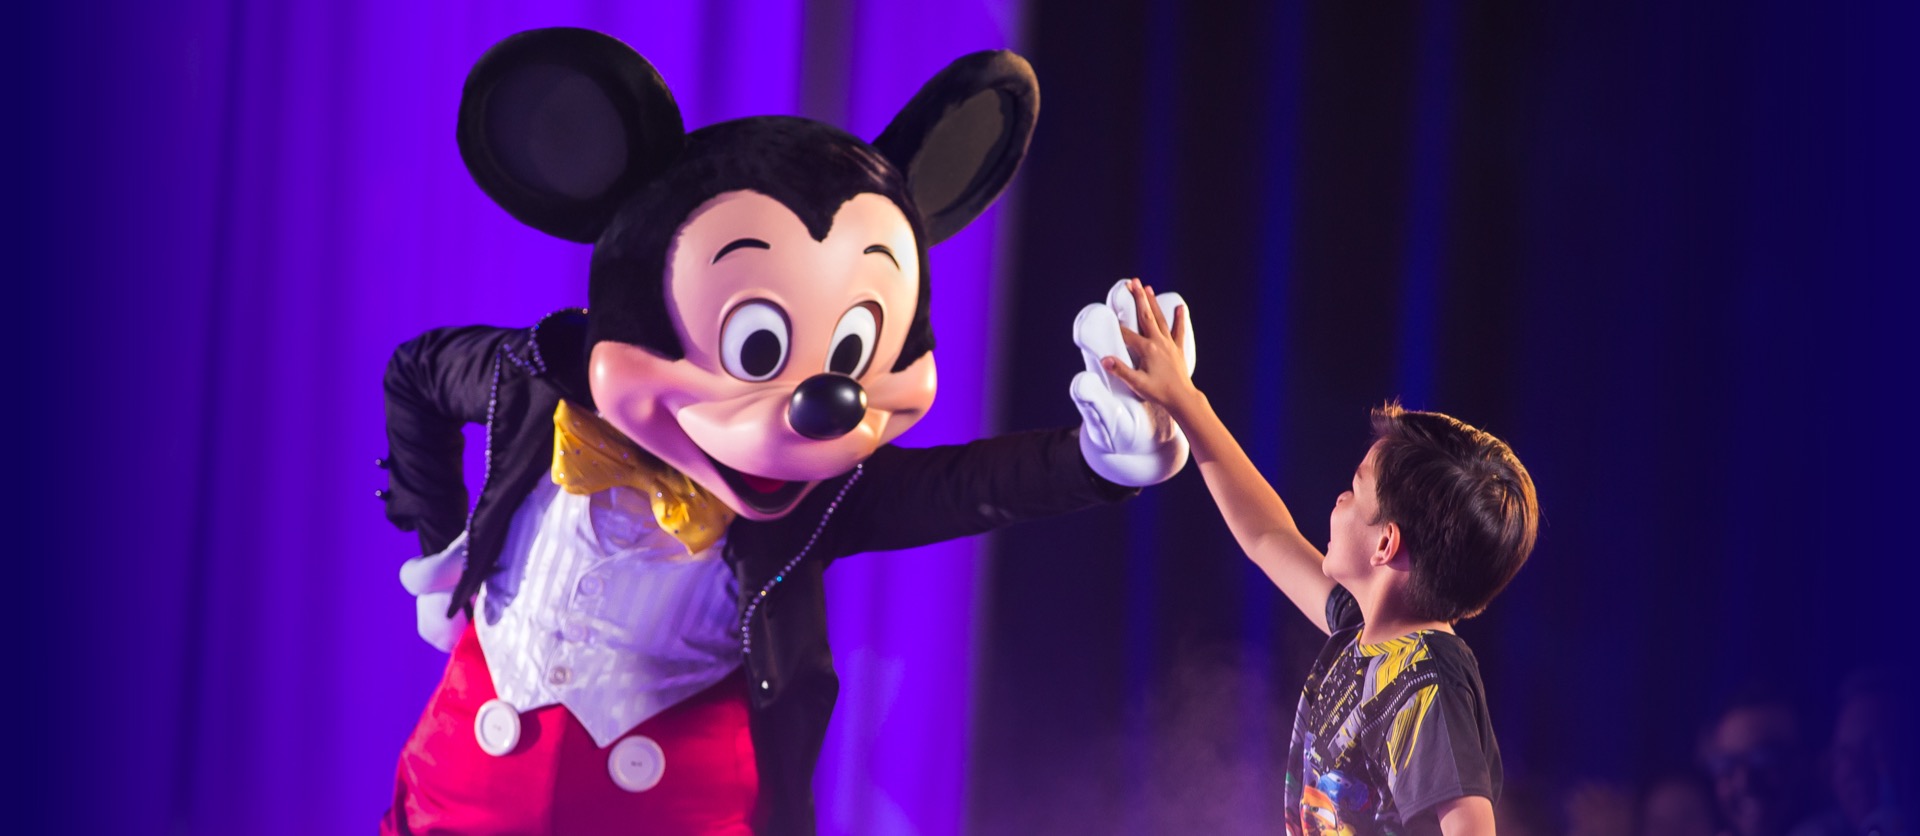 Mickey Mouse high-fives young boy at the show